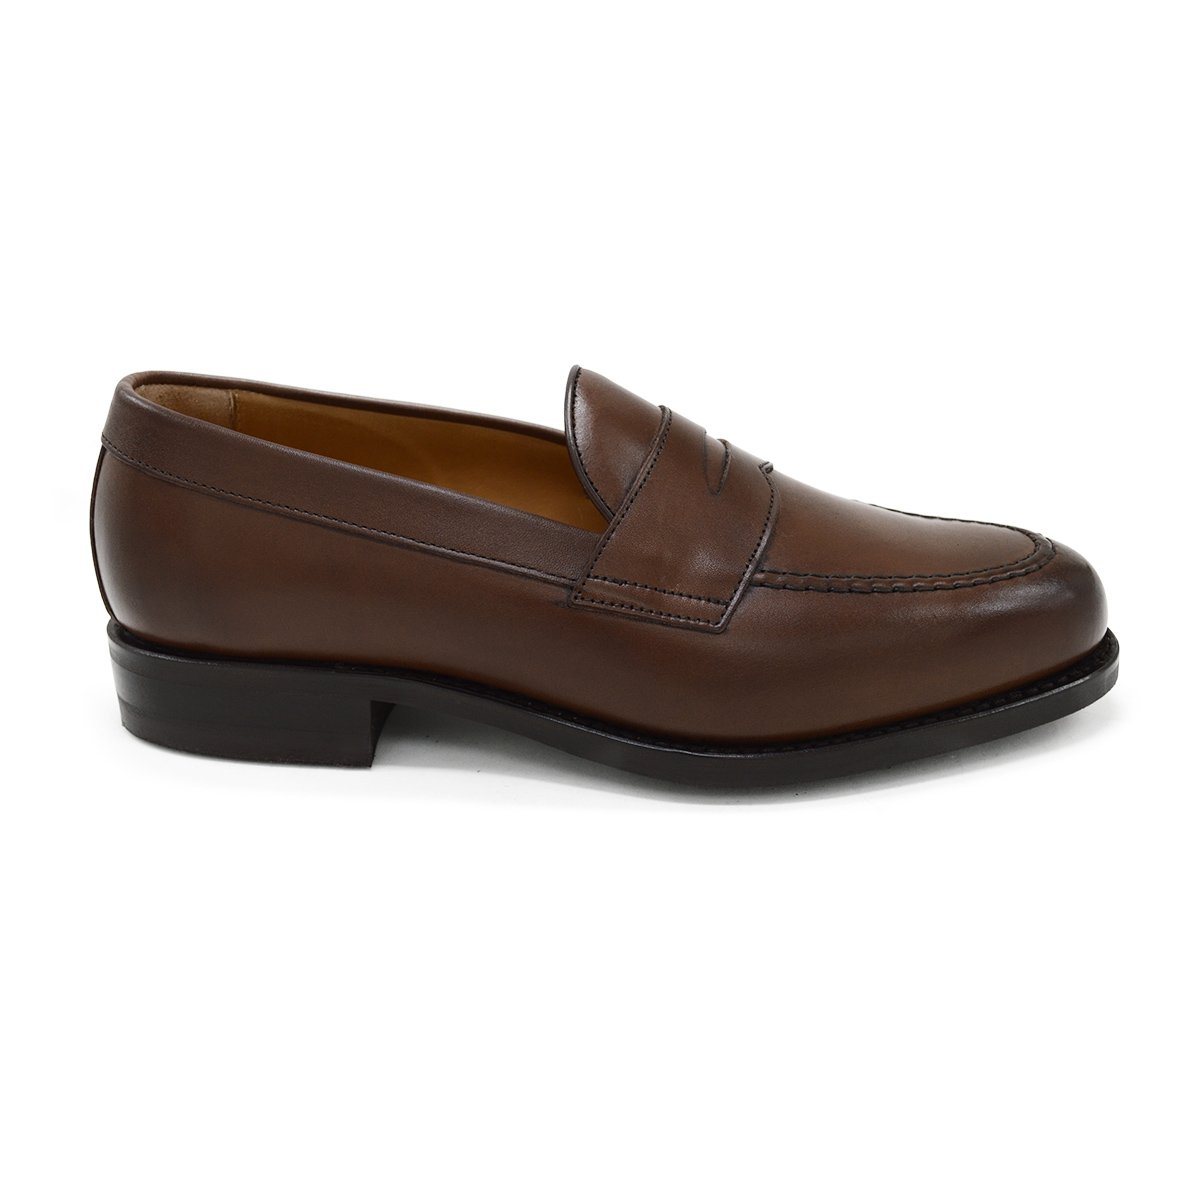 Berwick 1707 Penny Loafer (9628) -Melize Brown Dainite – A Fine Pair of ...